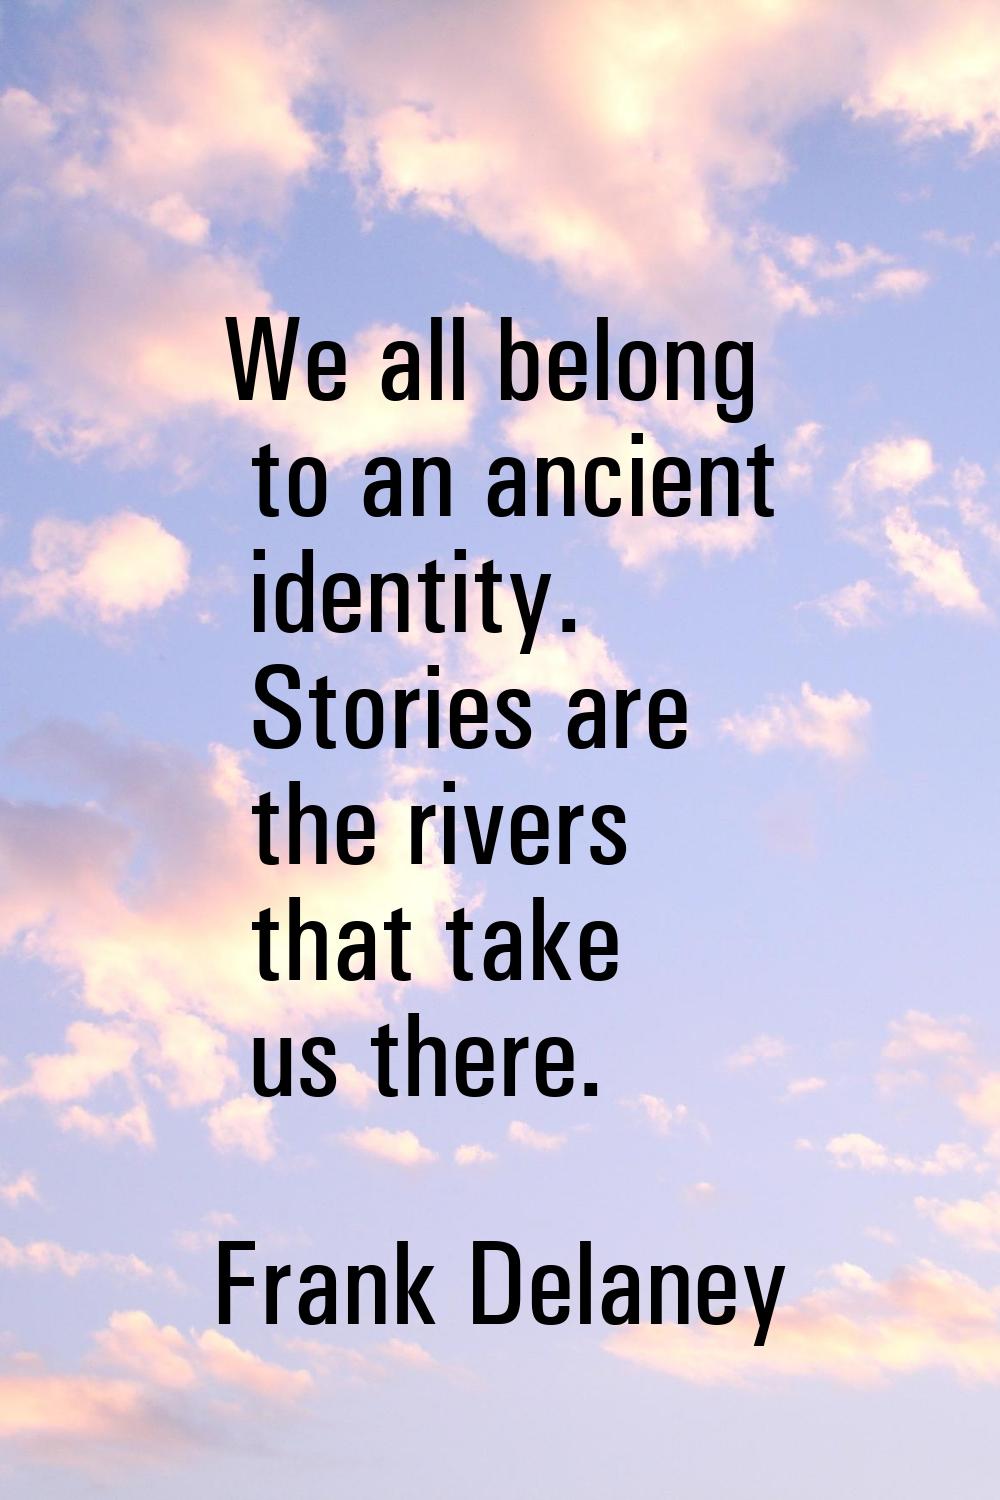 We all belong to an ancient identity. Stories are the rivers that take us there.